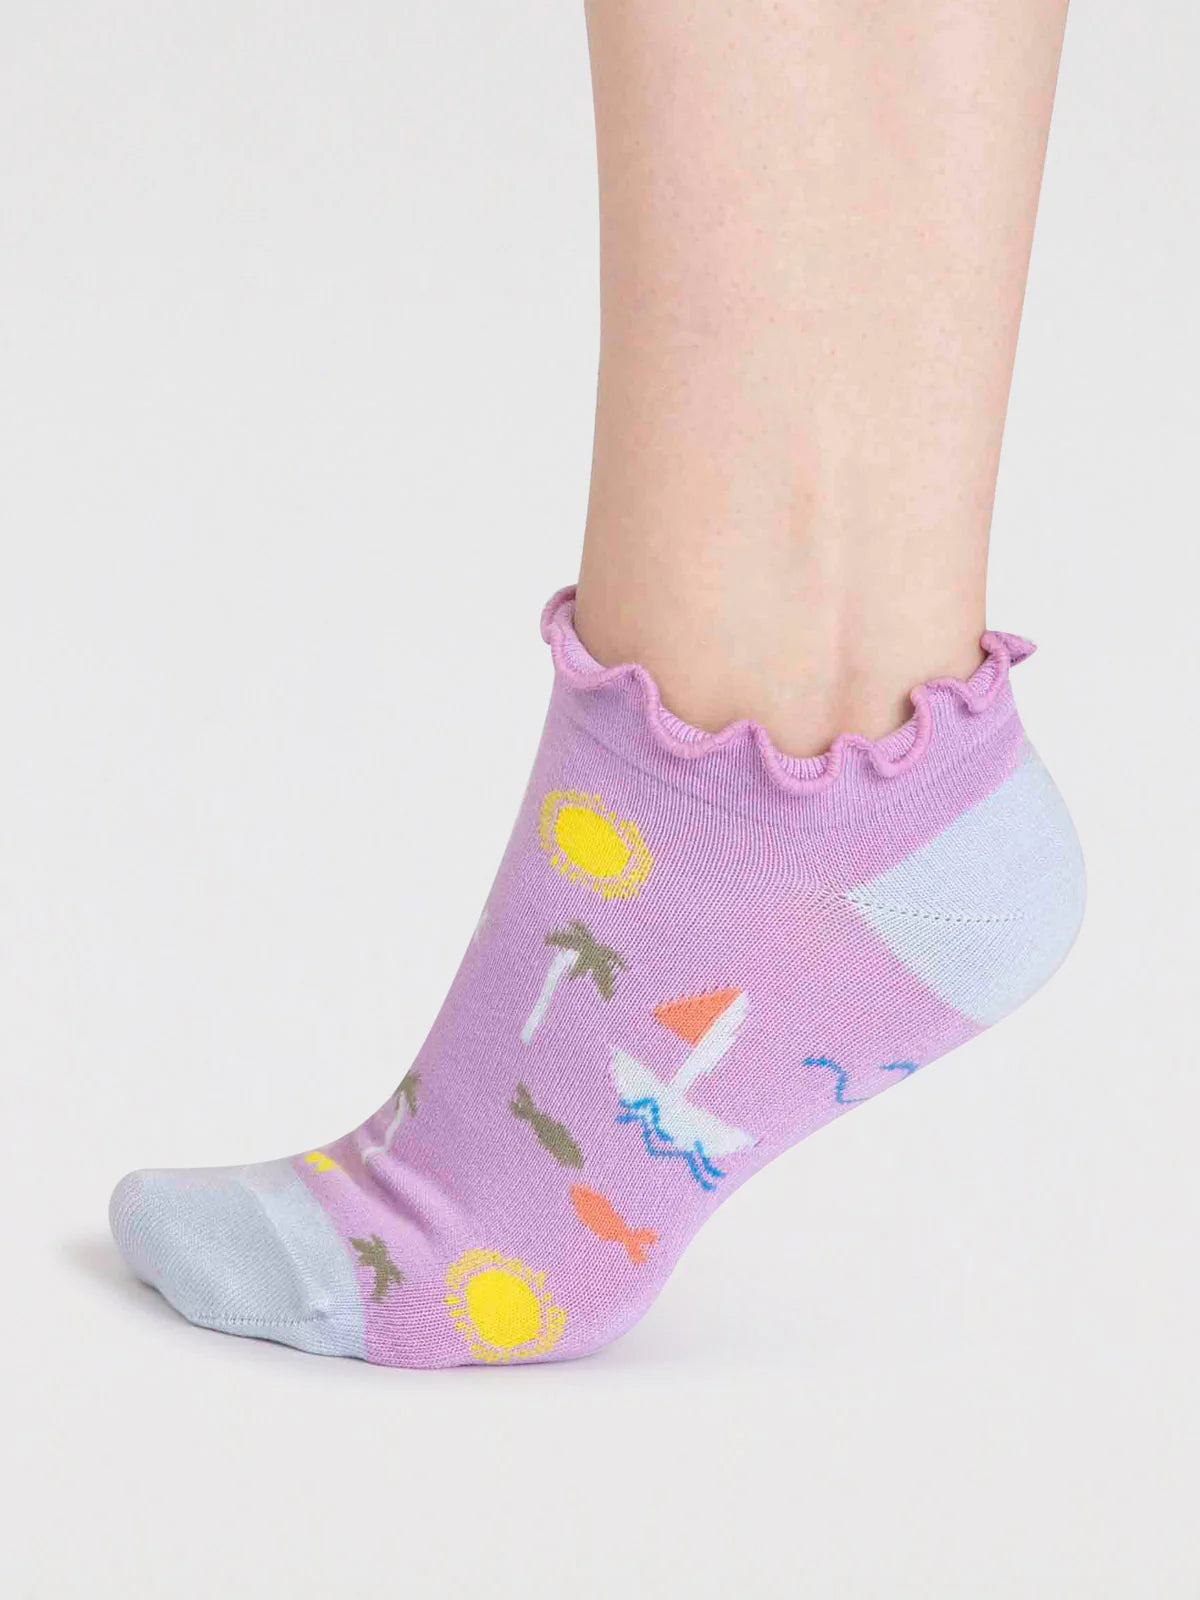 Going Sailing Bamboo Ankle Socks in Dusk Lilac - The Sockery